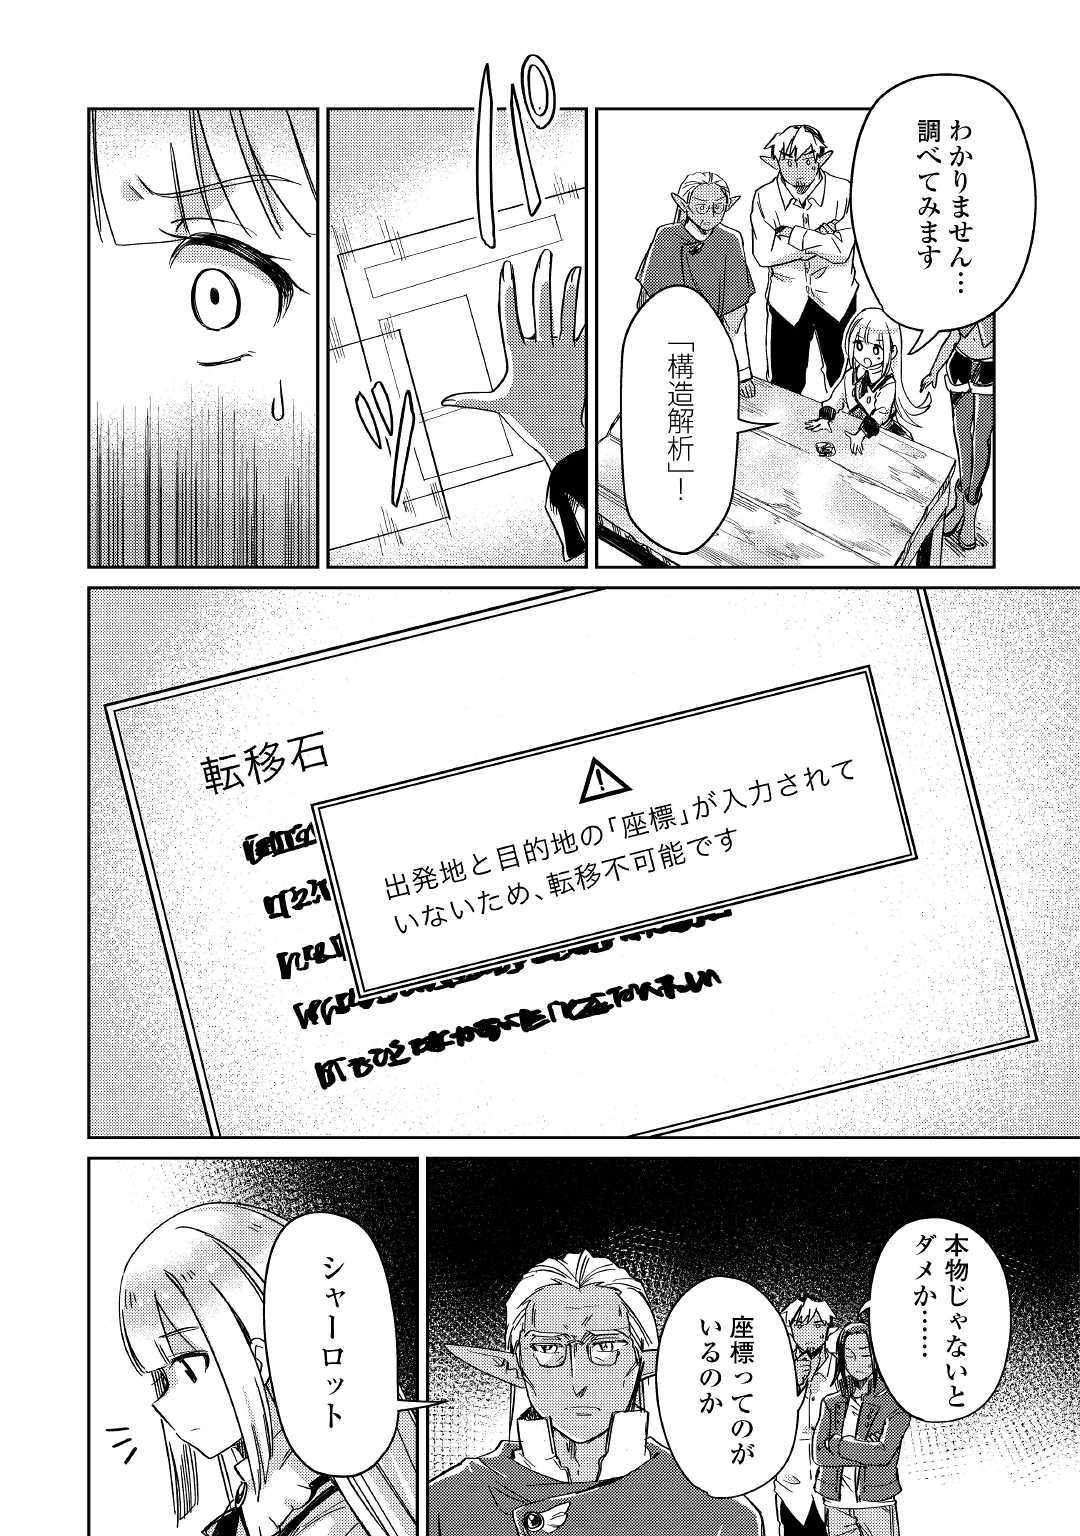 The Former Structural Researcher’s Story of Otherworldly Adventure 第20話 - Page 32